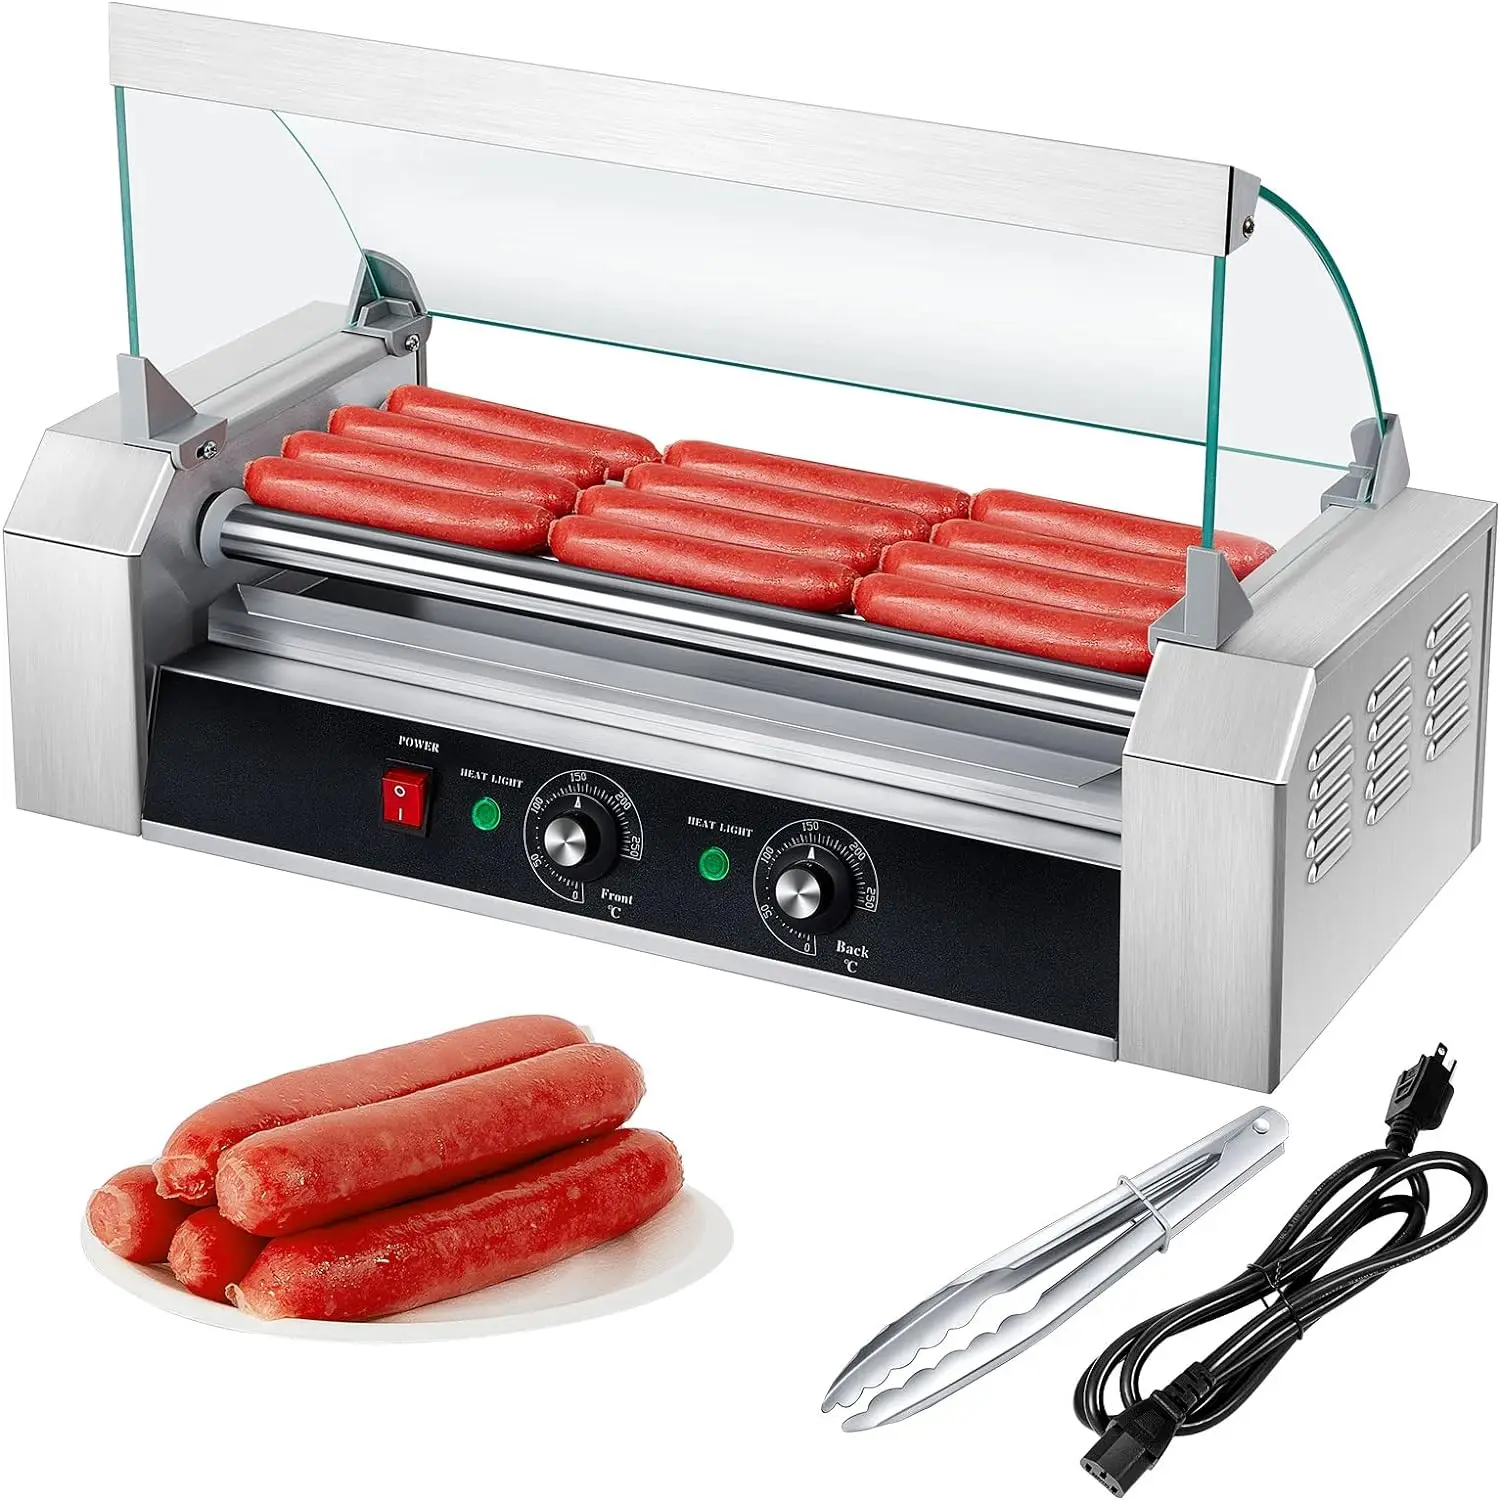 

Hot Dog Roller Machine 5 Roller 12 Hot Dog Capacity Grill Cooker Machine with Cover Stainless Steel Hot Dog Roller Warmer Sausa